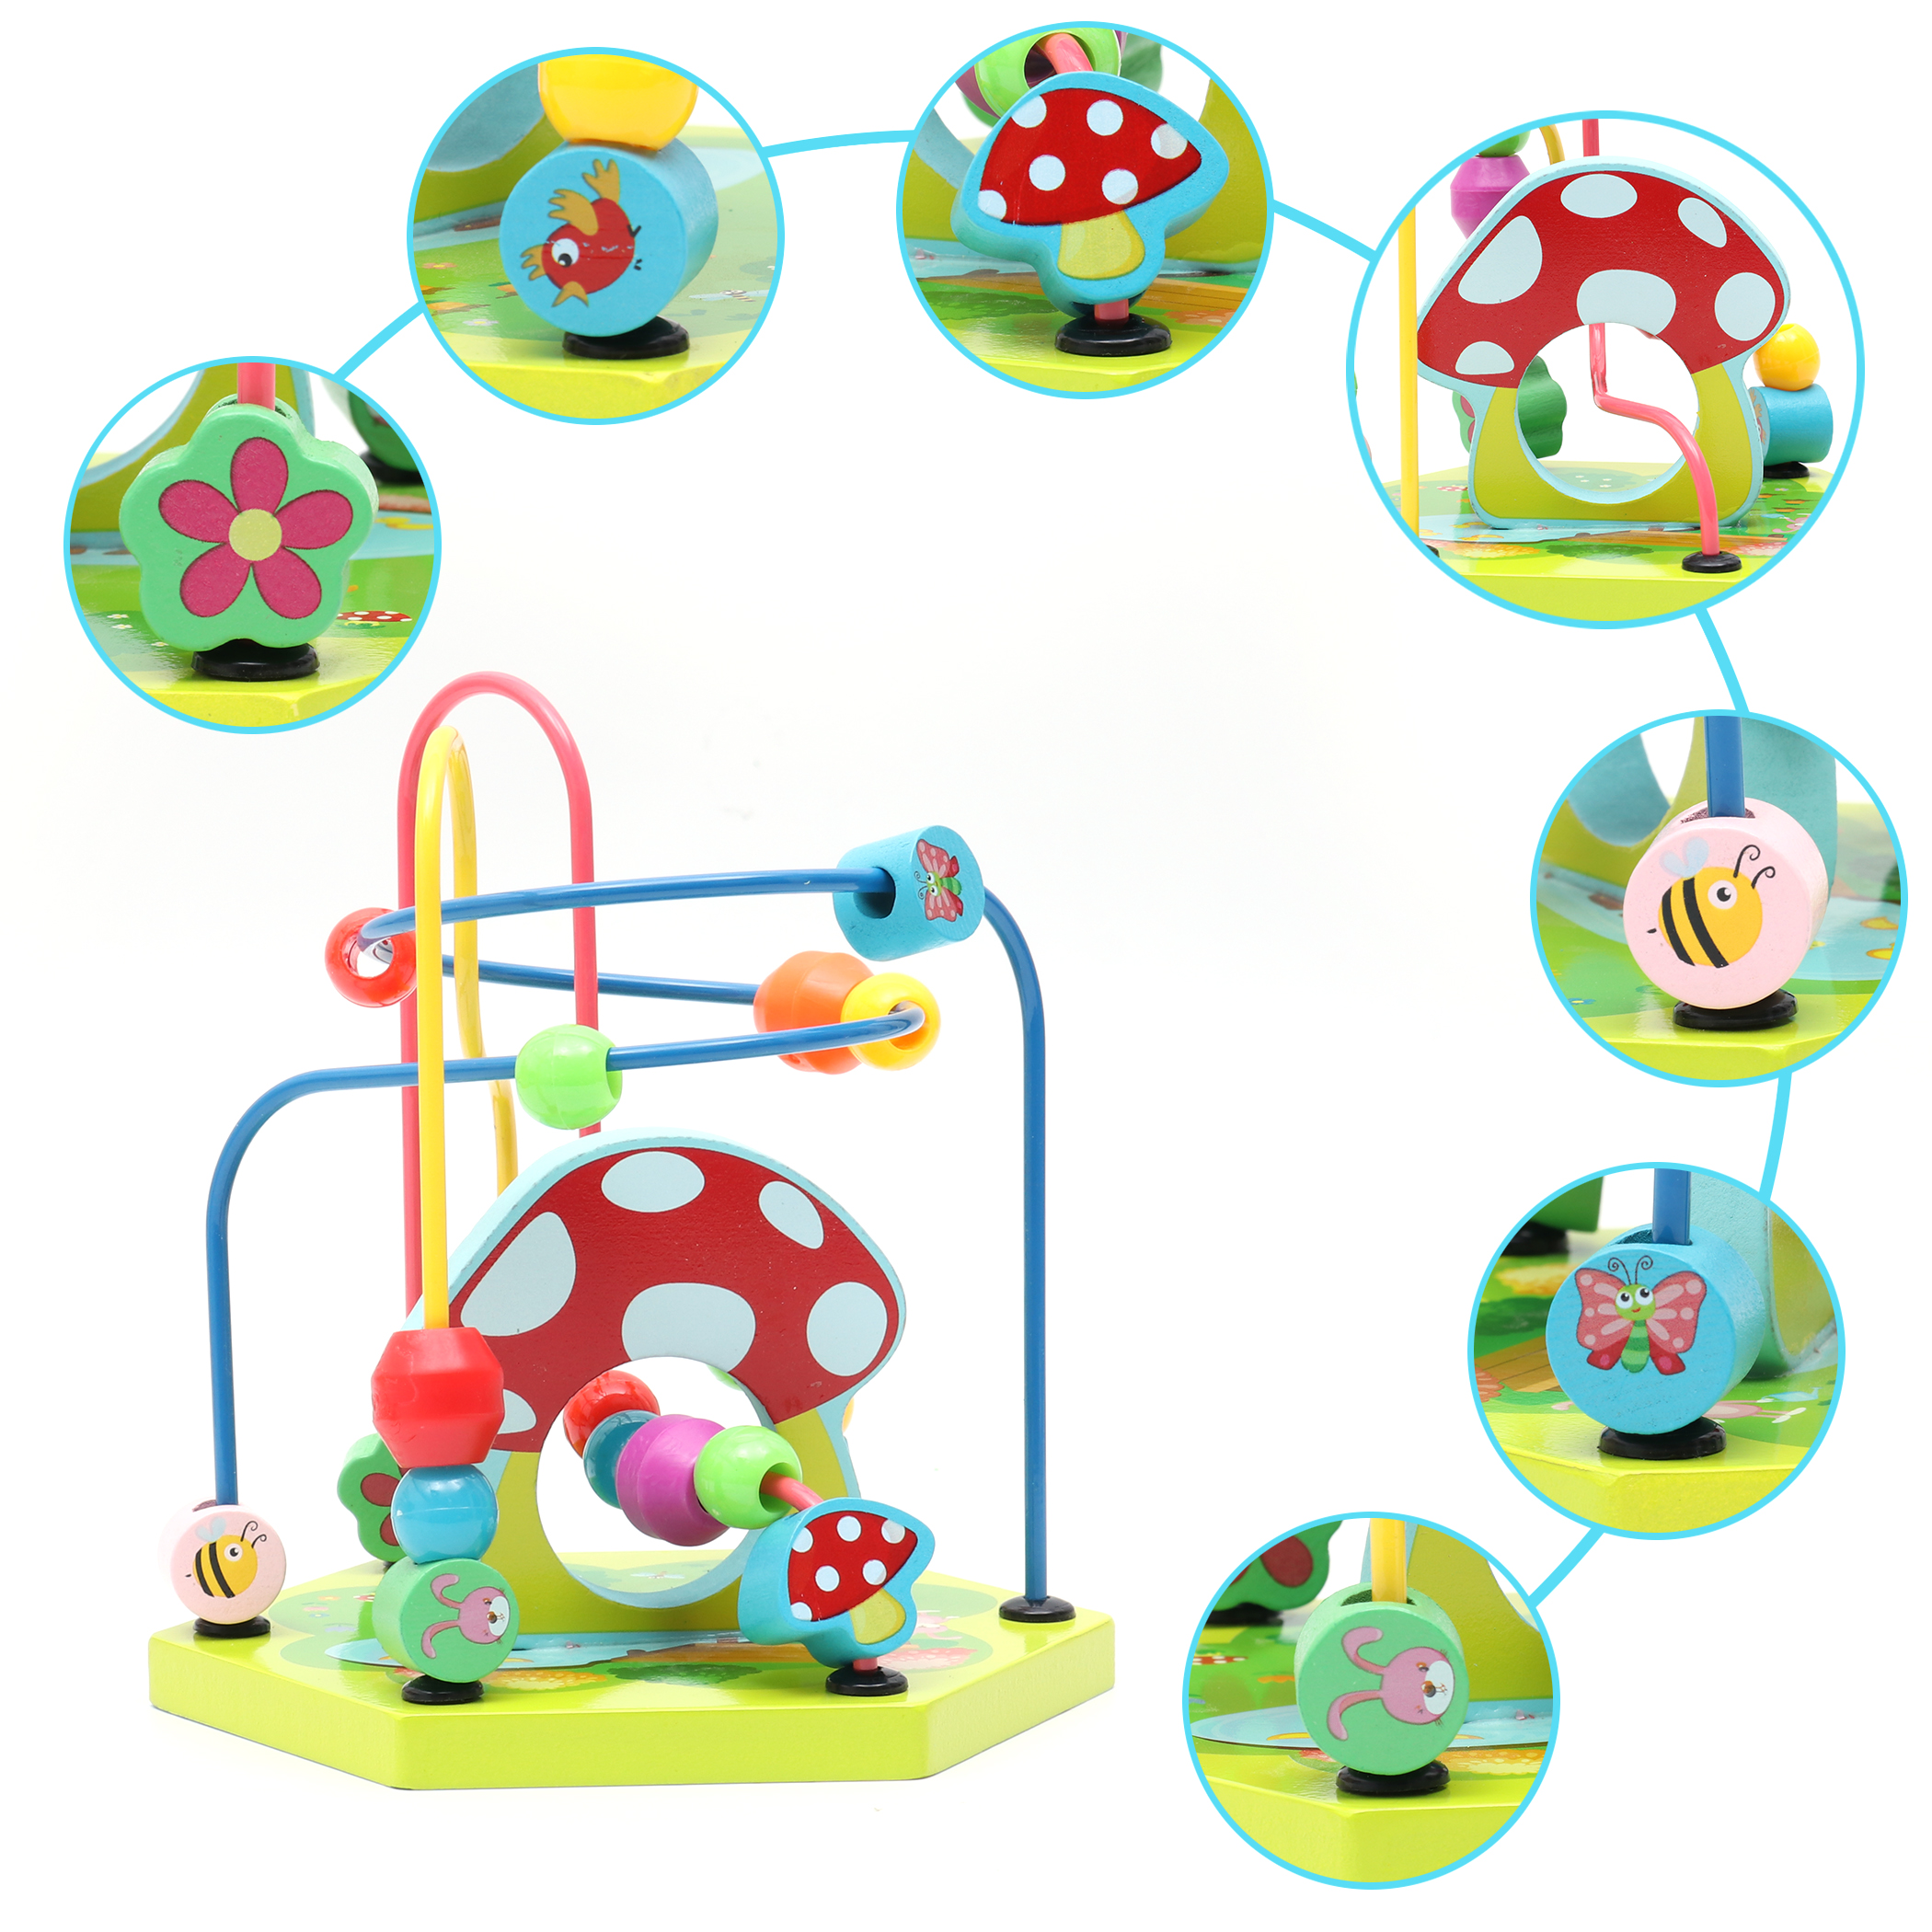 Lavievert 9-in-1 Play Cube Activity Center Multifunctional Bead Maze Toddler Educational Toys Game … - image 3 of 6